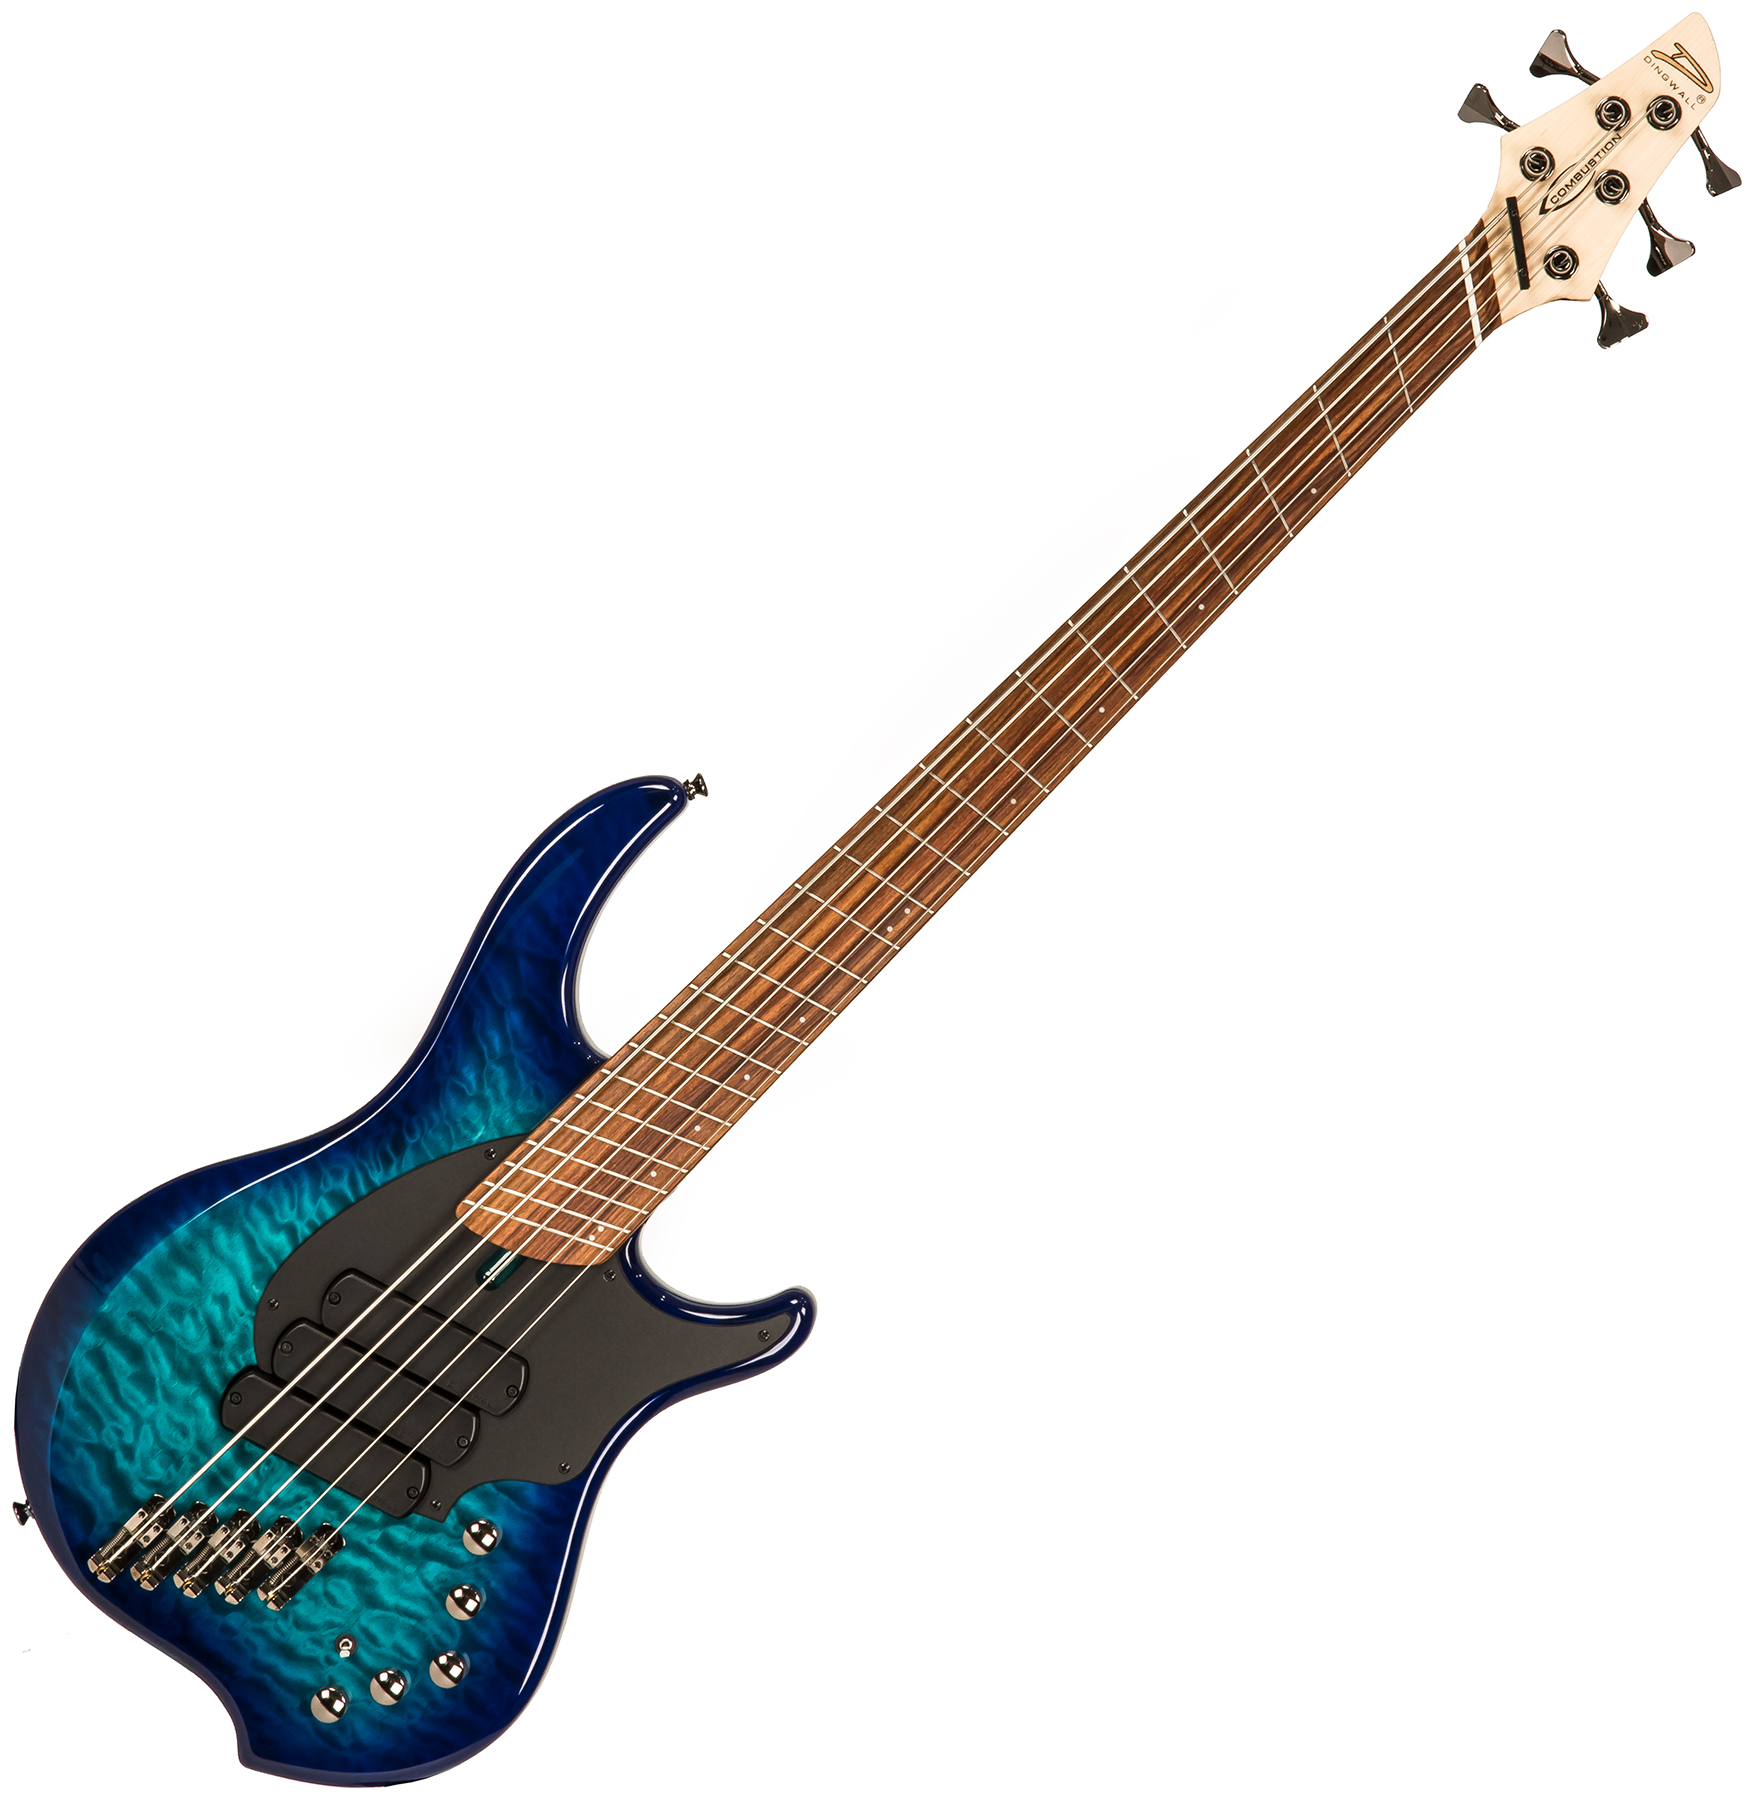 Dingwall Combustion 5 3-pickups Pf +housse - Whalepool Burst - Solidbody E-bass - Variation 1